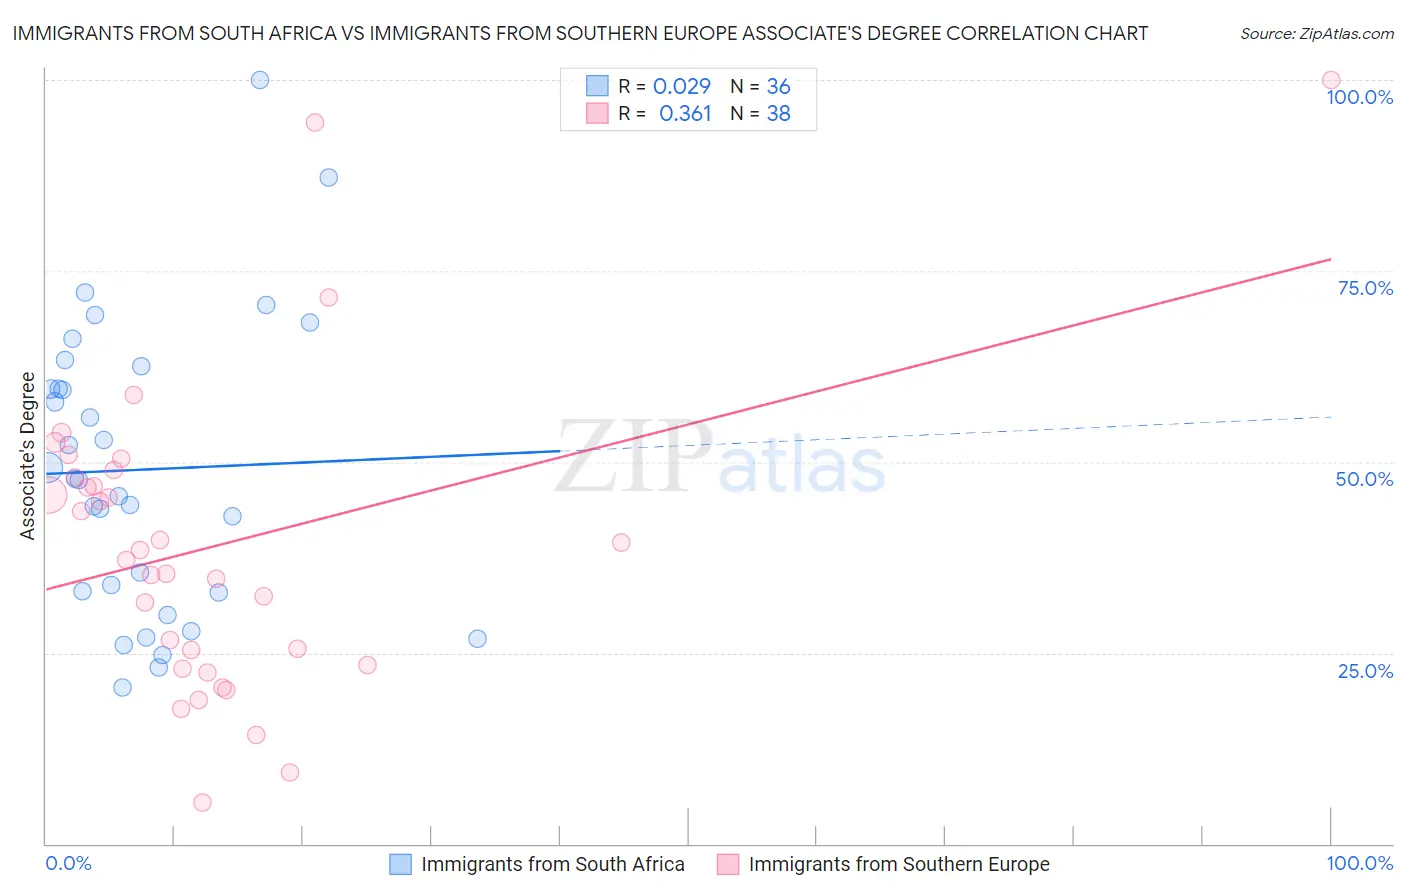 Immigrants from South Africa vs Immigrants from Southern Europe Associate's Degree